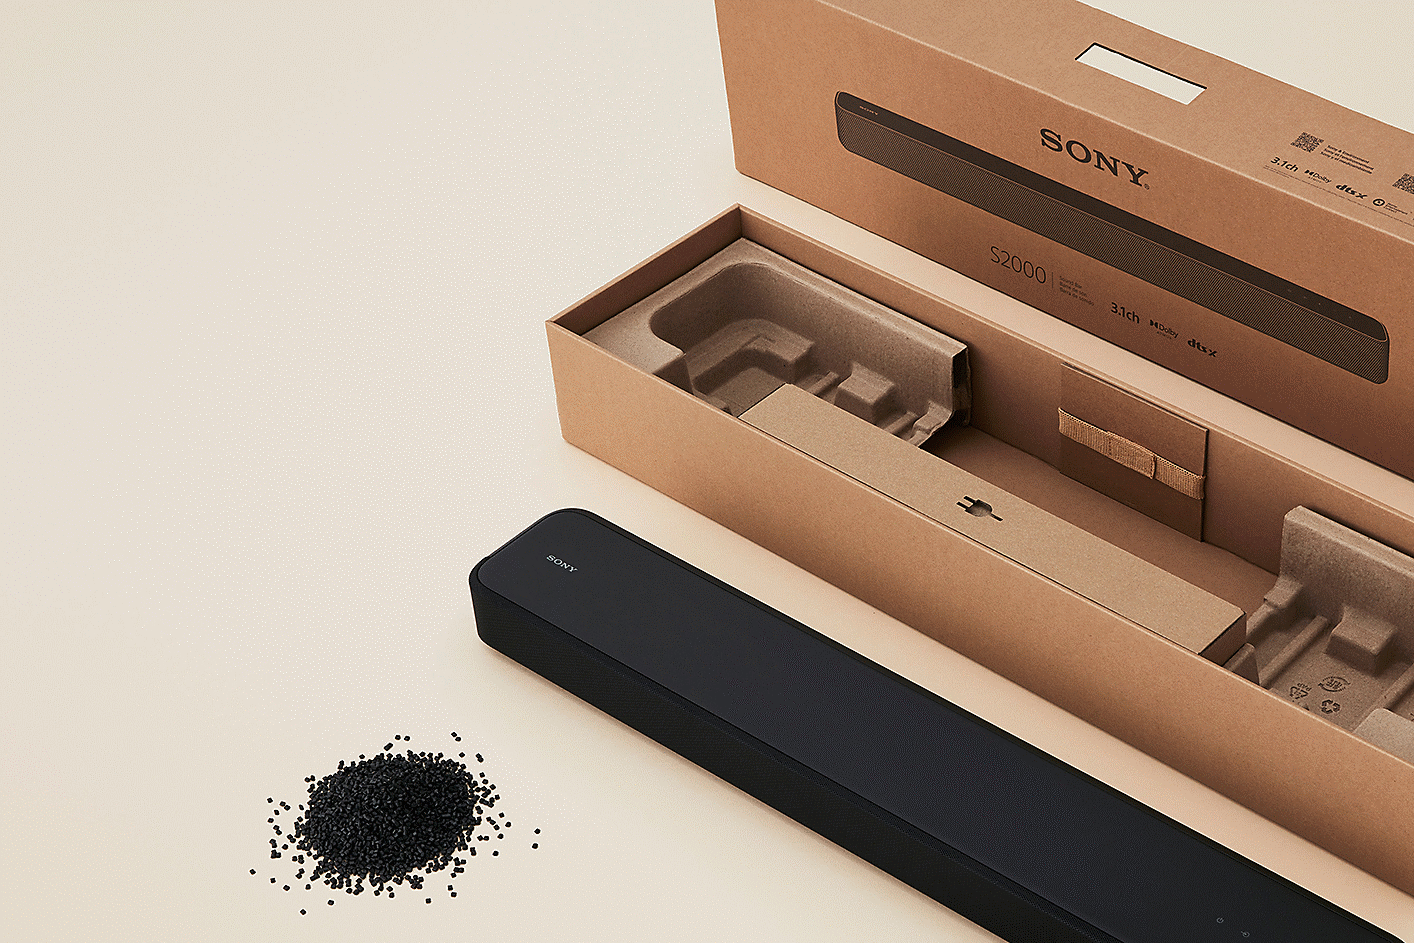 Image of a soundbar, its paper packaging materials and a pile of plastic pellets.